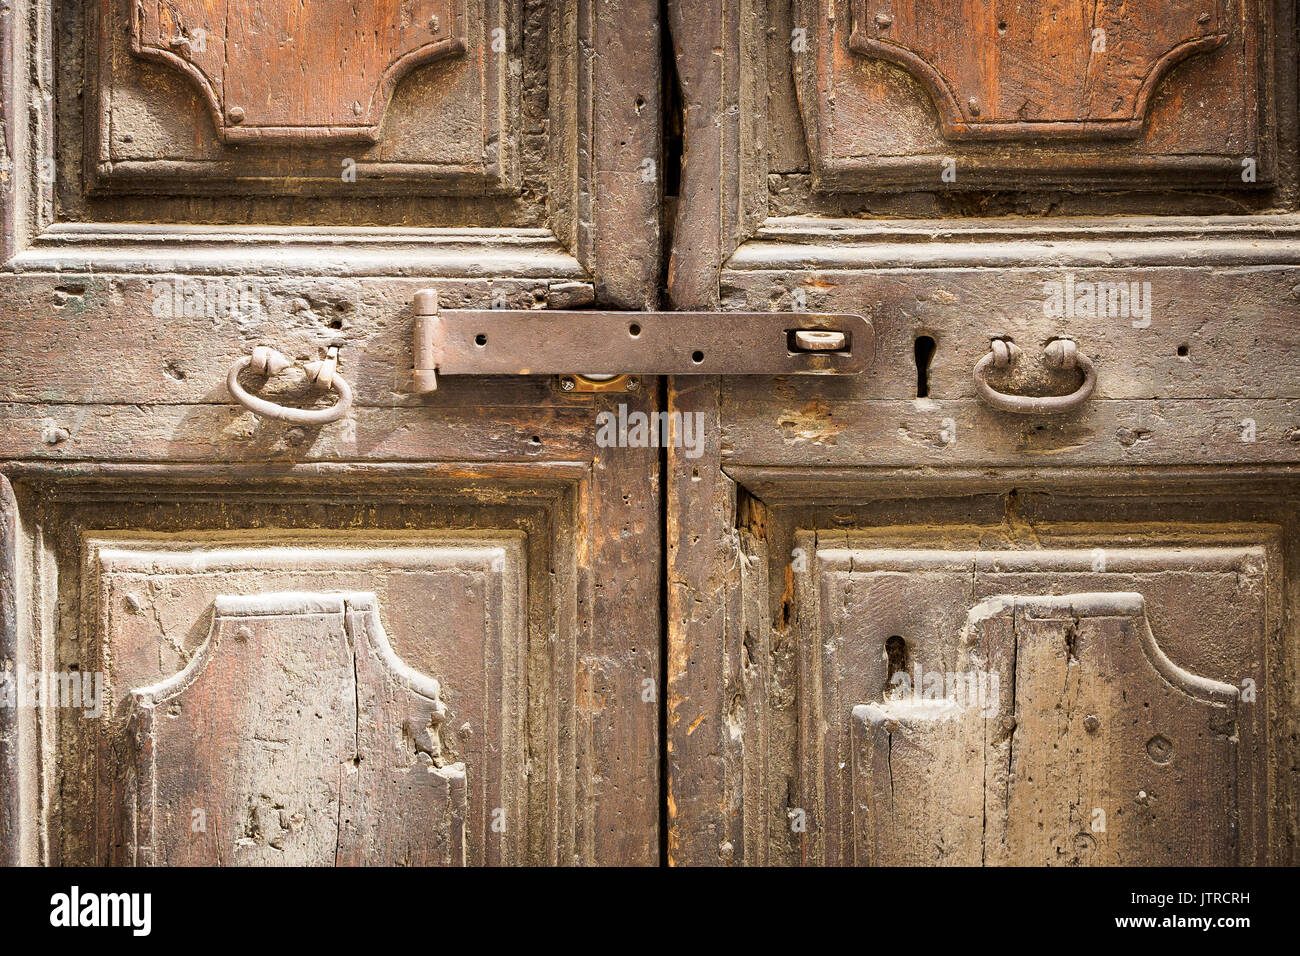 Old rusty latch close up on an ancient wooden door with metal handles. Stock Photo